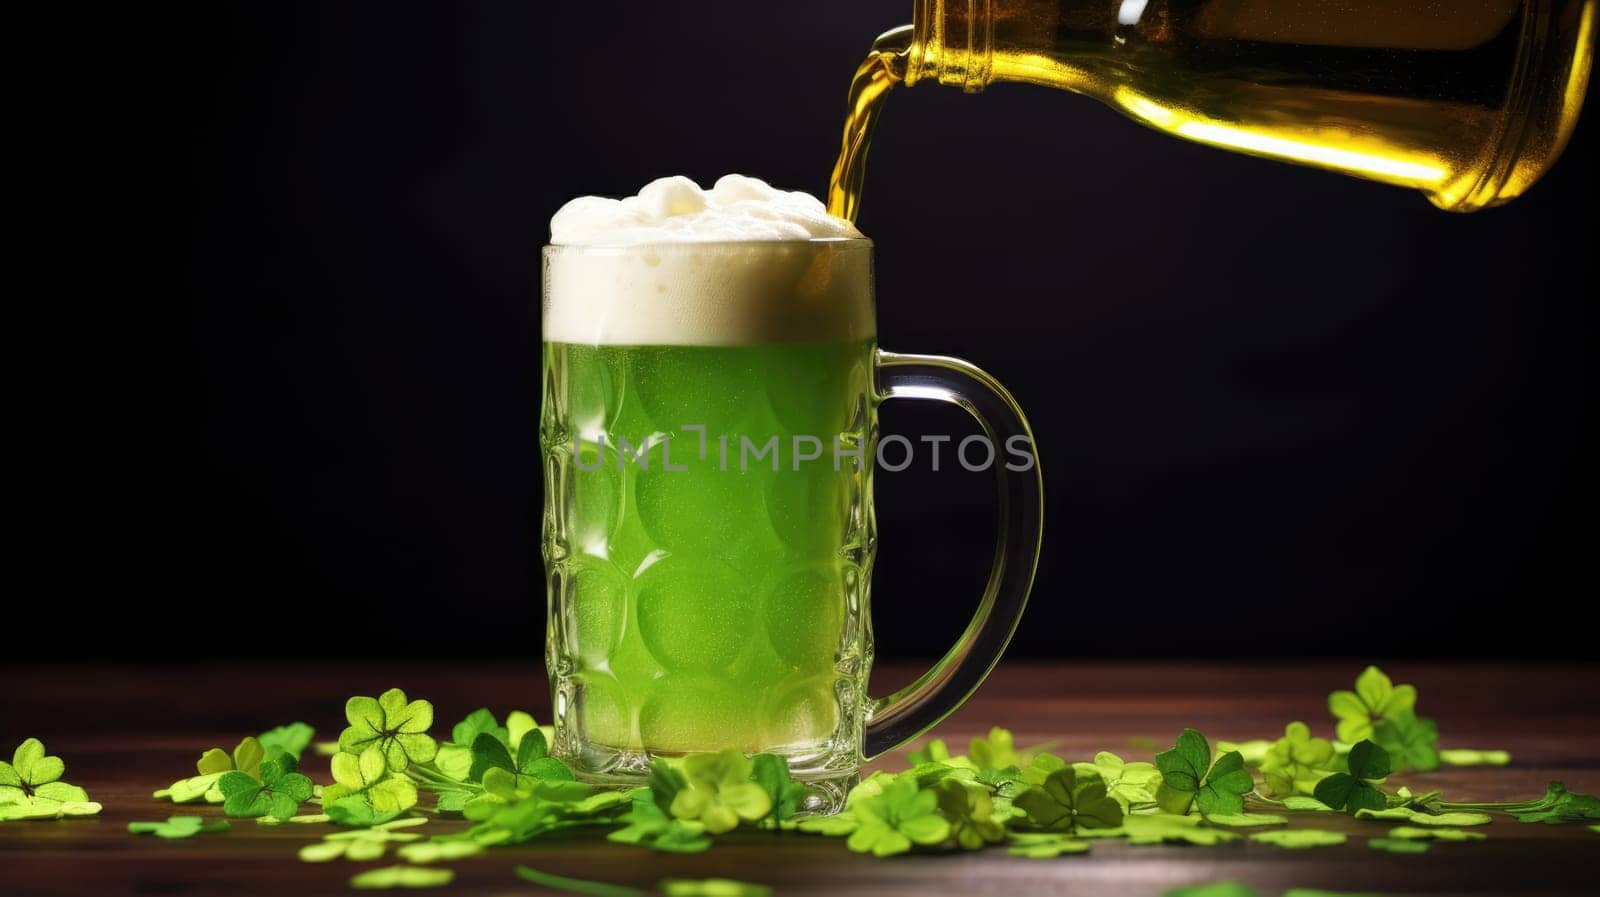 Hand pouring green beer in mug with green four-leaf clover on dark background St. Patricks Day by JuliaDorian